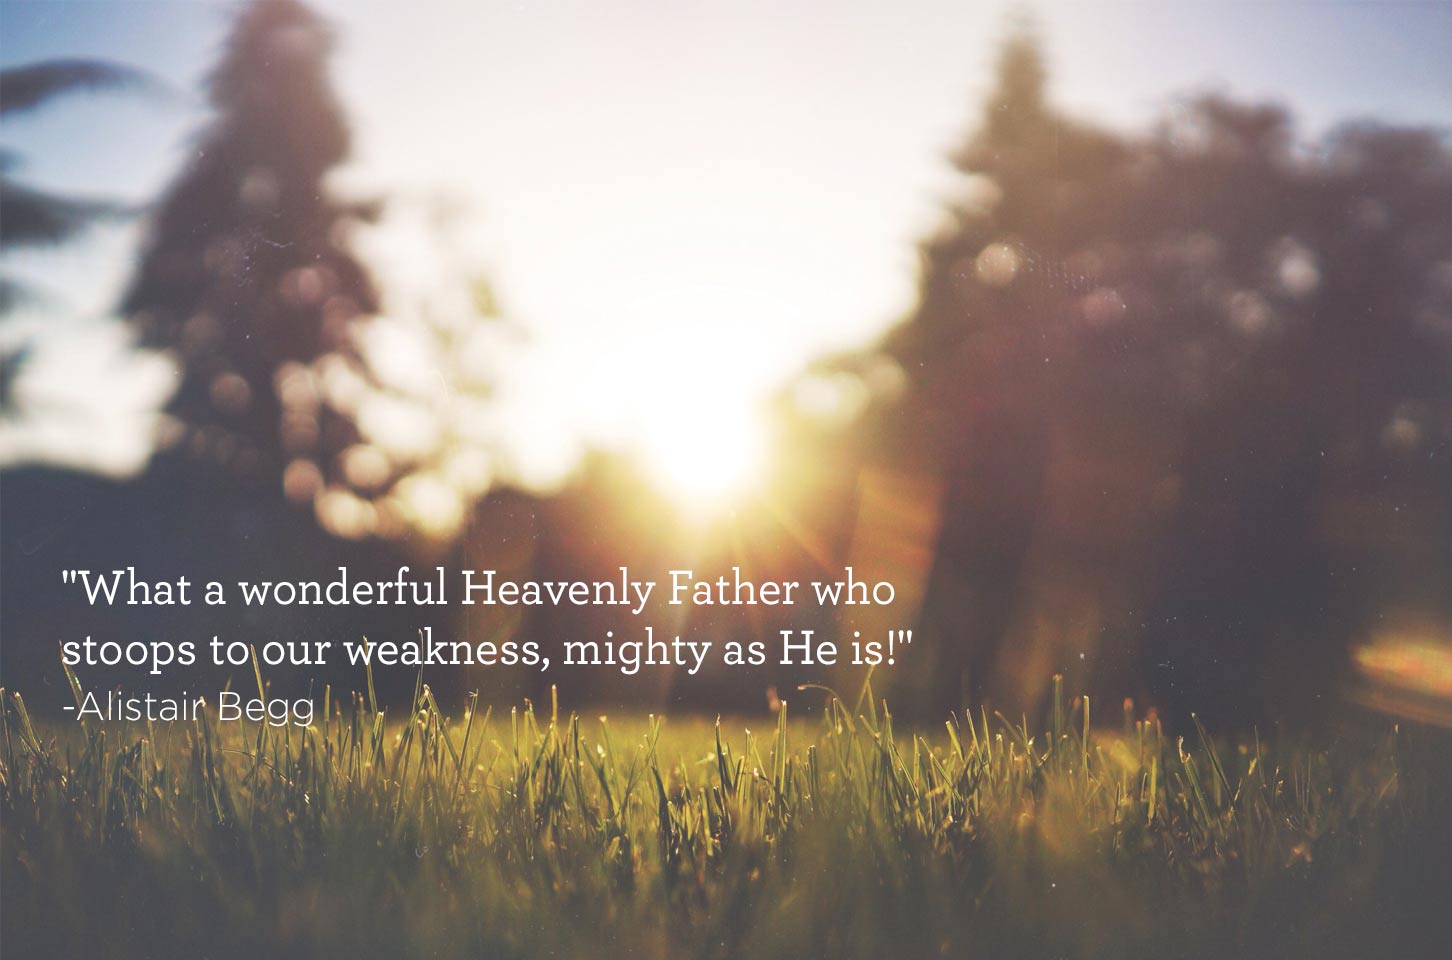 thumbnail image for A Wonderful Heavenly Father